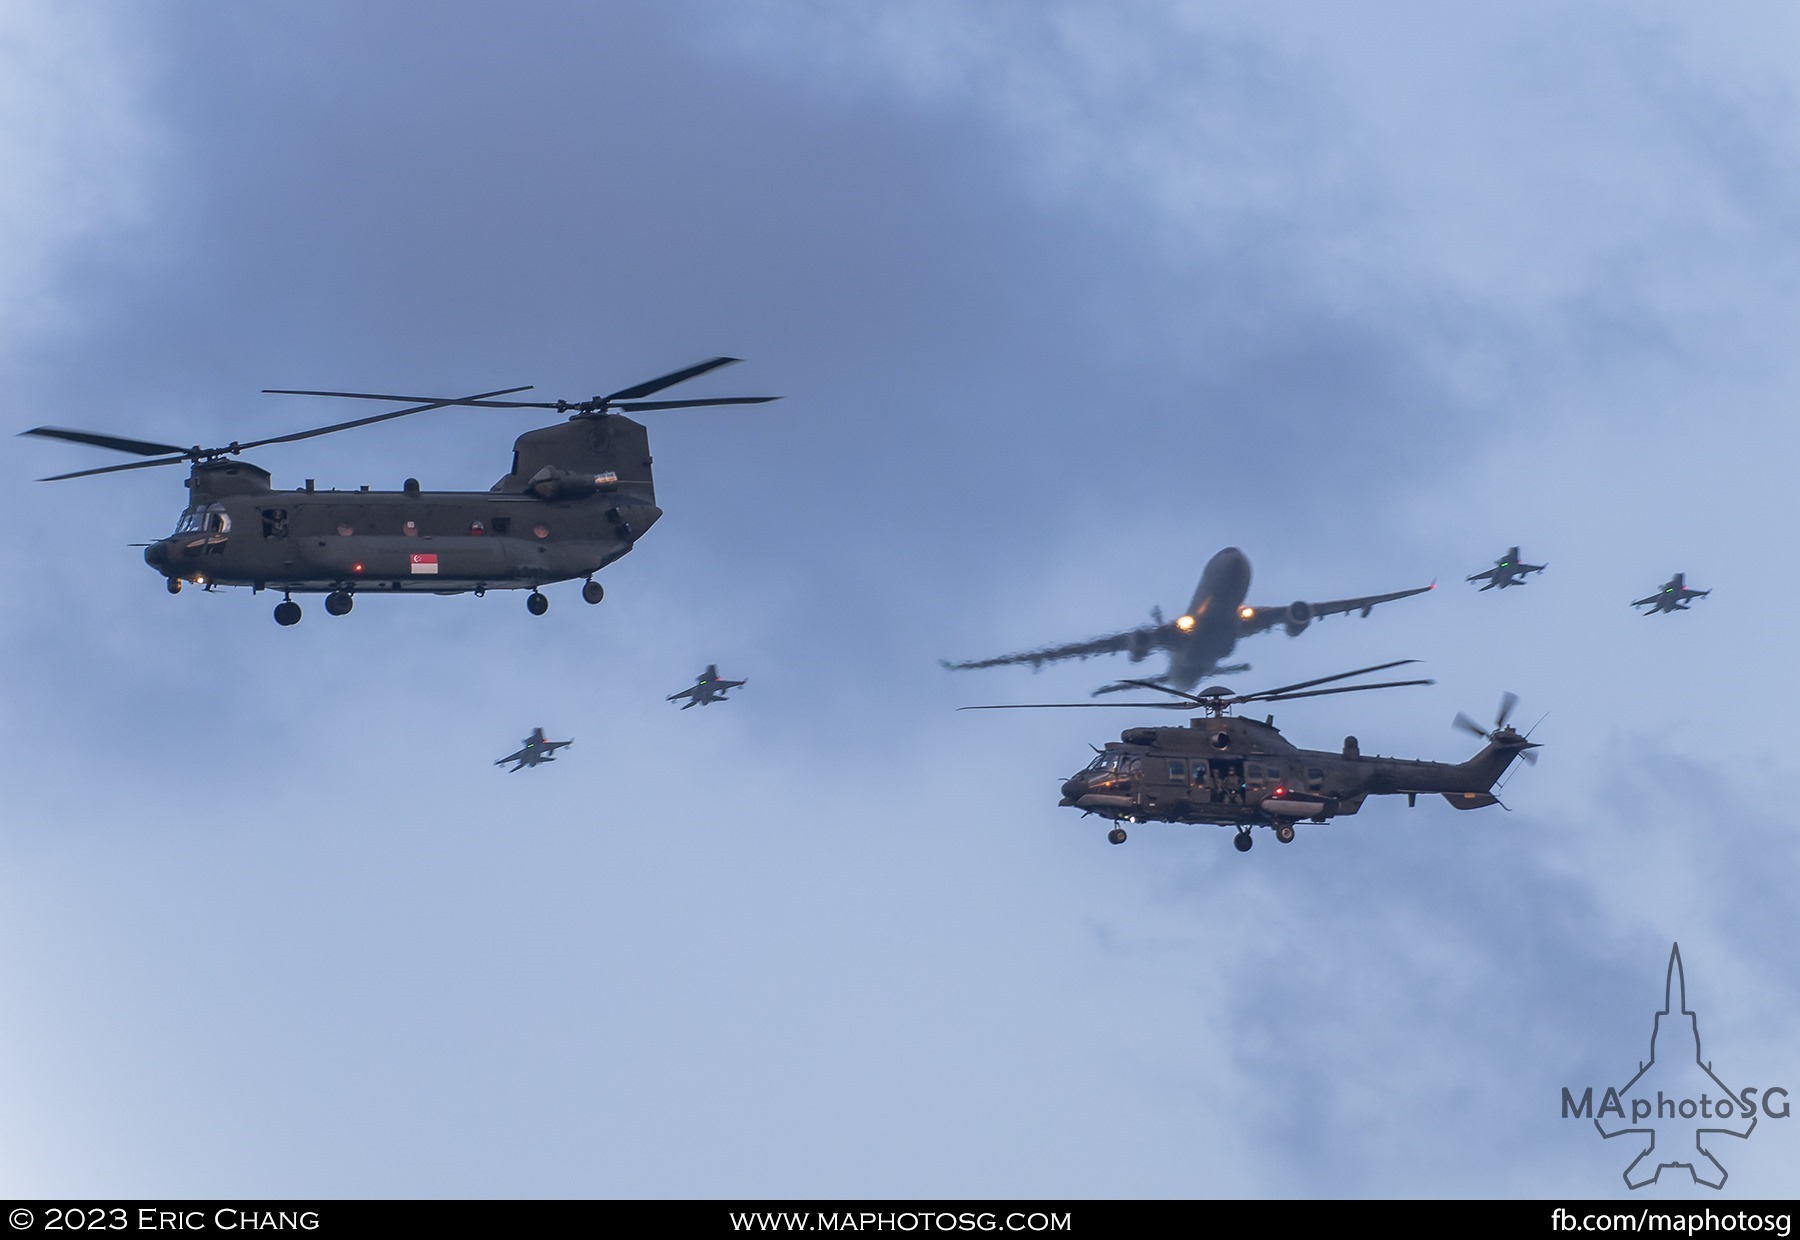 The well-timed aerial segment saw the MRTT and F16 formation enter show centre just as the H225M and CH47F formation make their exit.